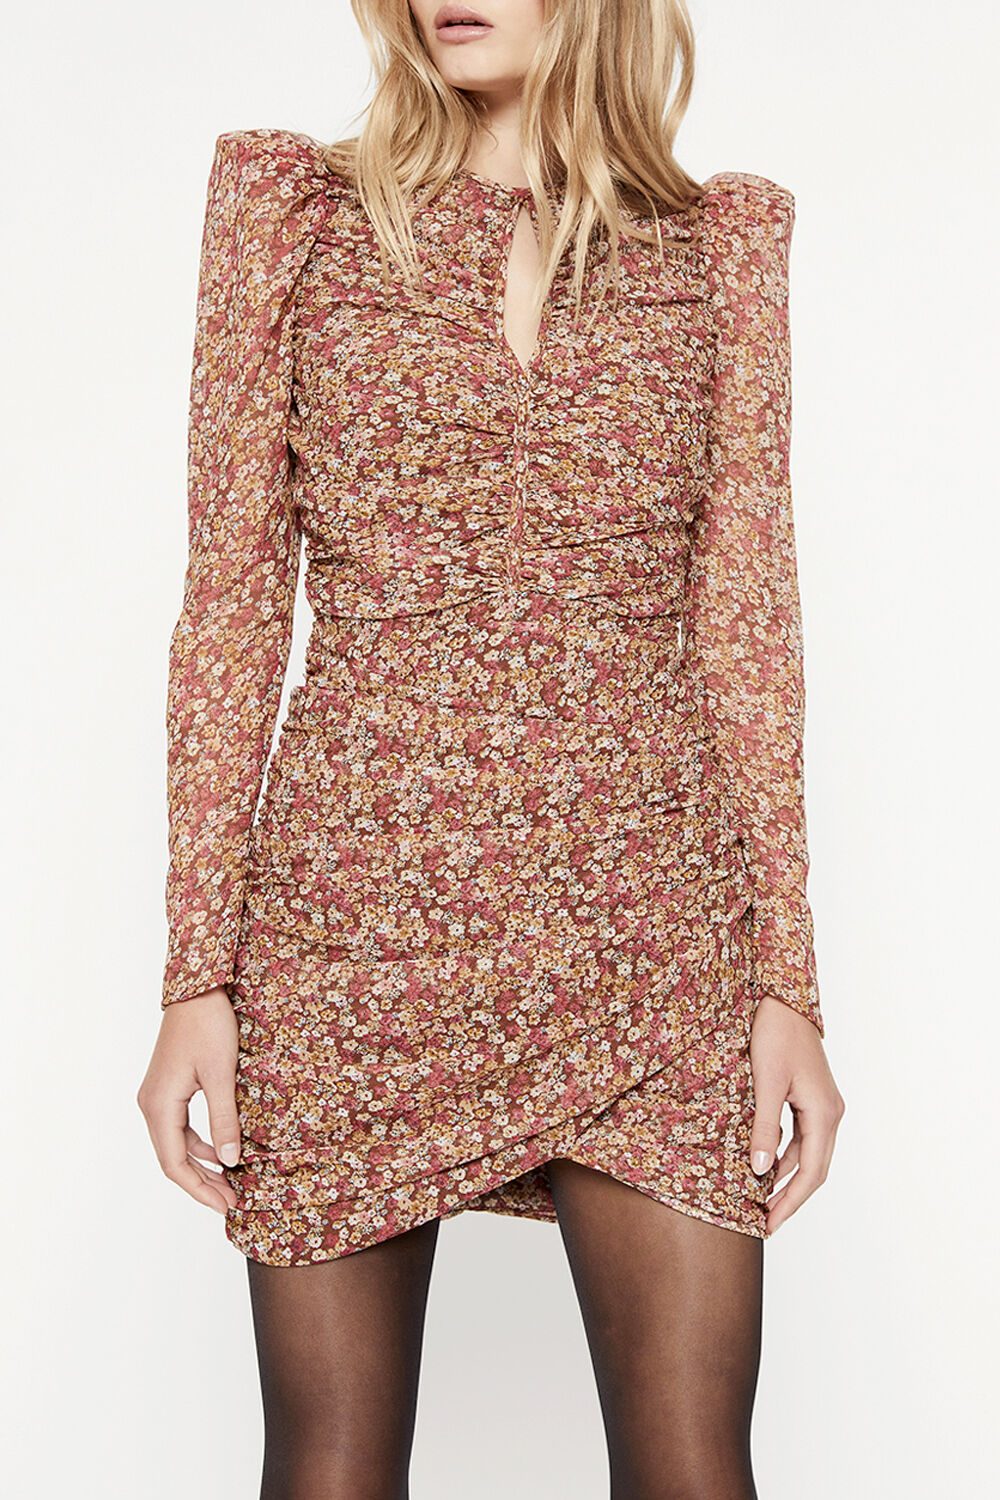 RUCHED DITSY FLORAL MINI DRESS in colour CAVIAR